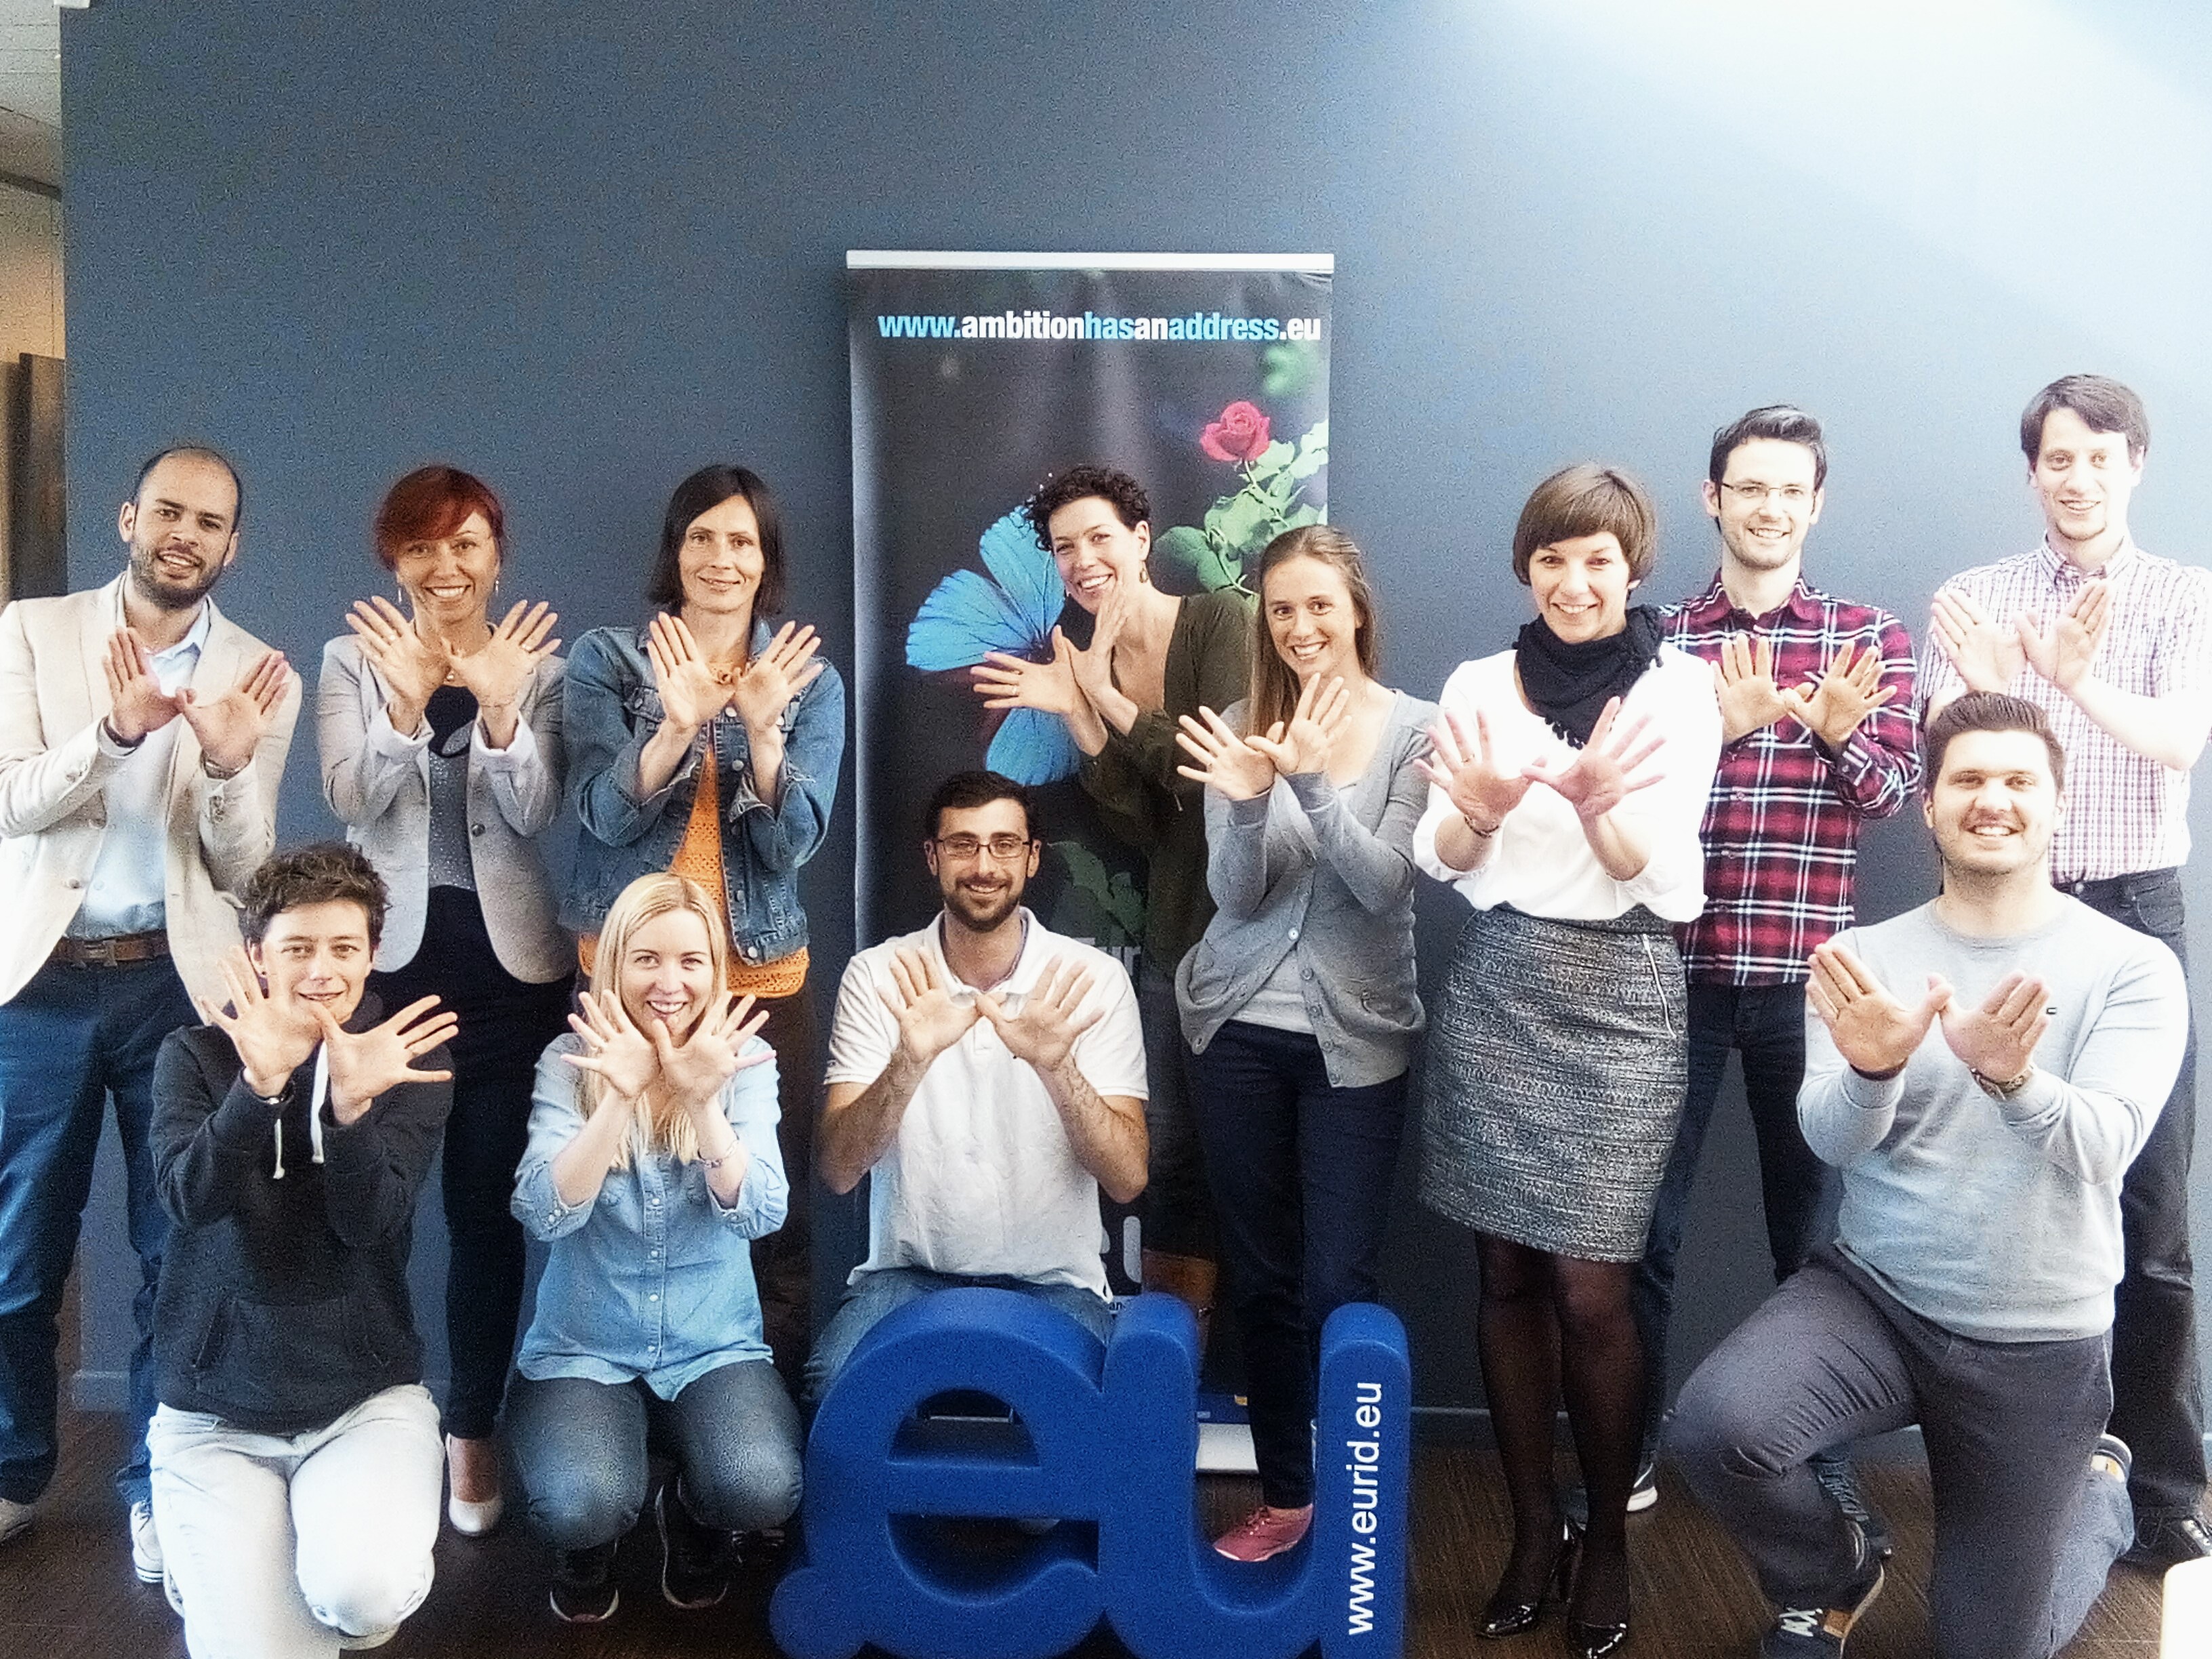 The @EUregistry supporting ‪#‎natura2000day‬. Join the butterfly effect: www.natura2000day.eu